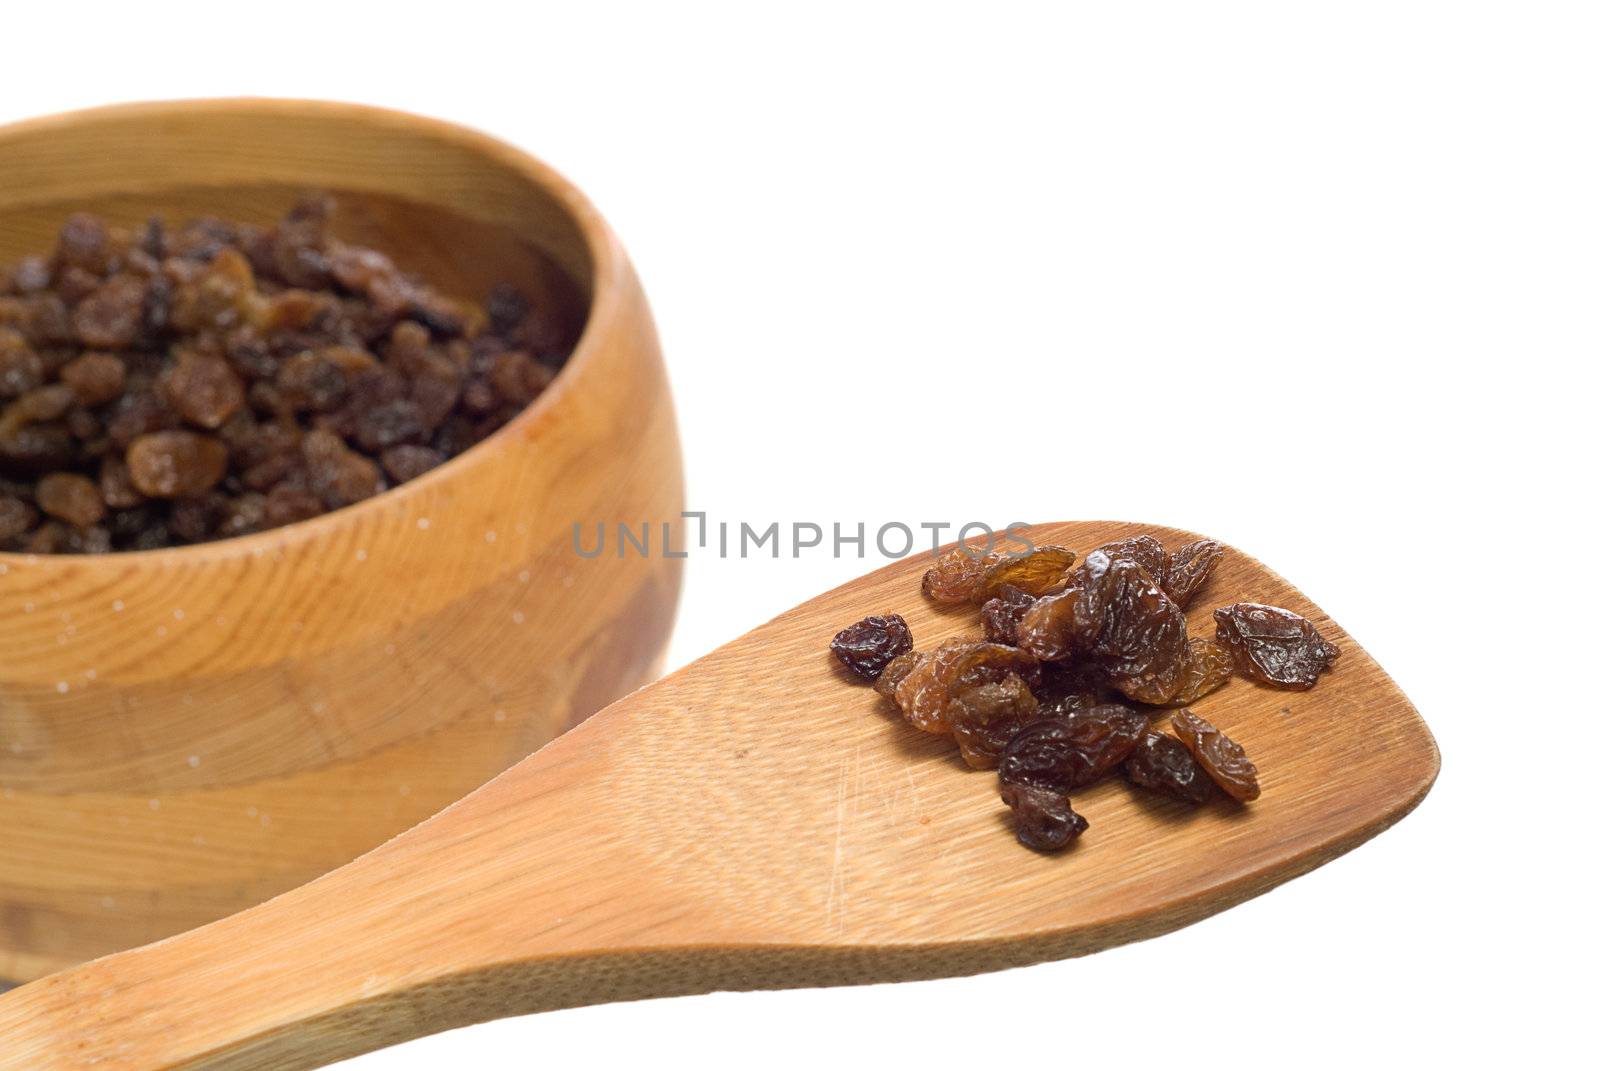 A small cluster of sundried raisins being displayed on a wooden spatula with more in a bowl OOF in the background